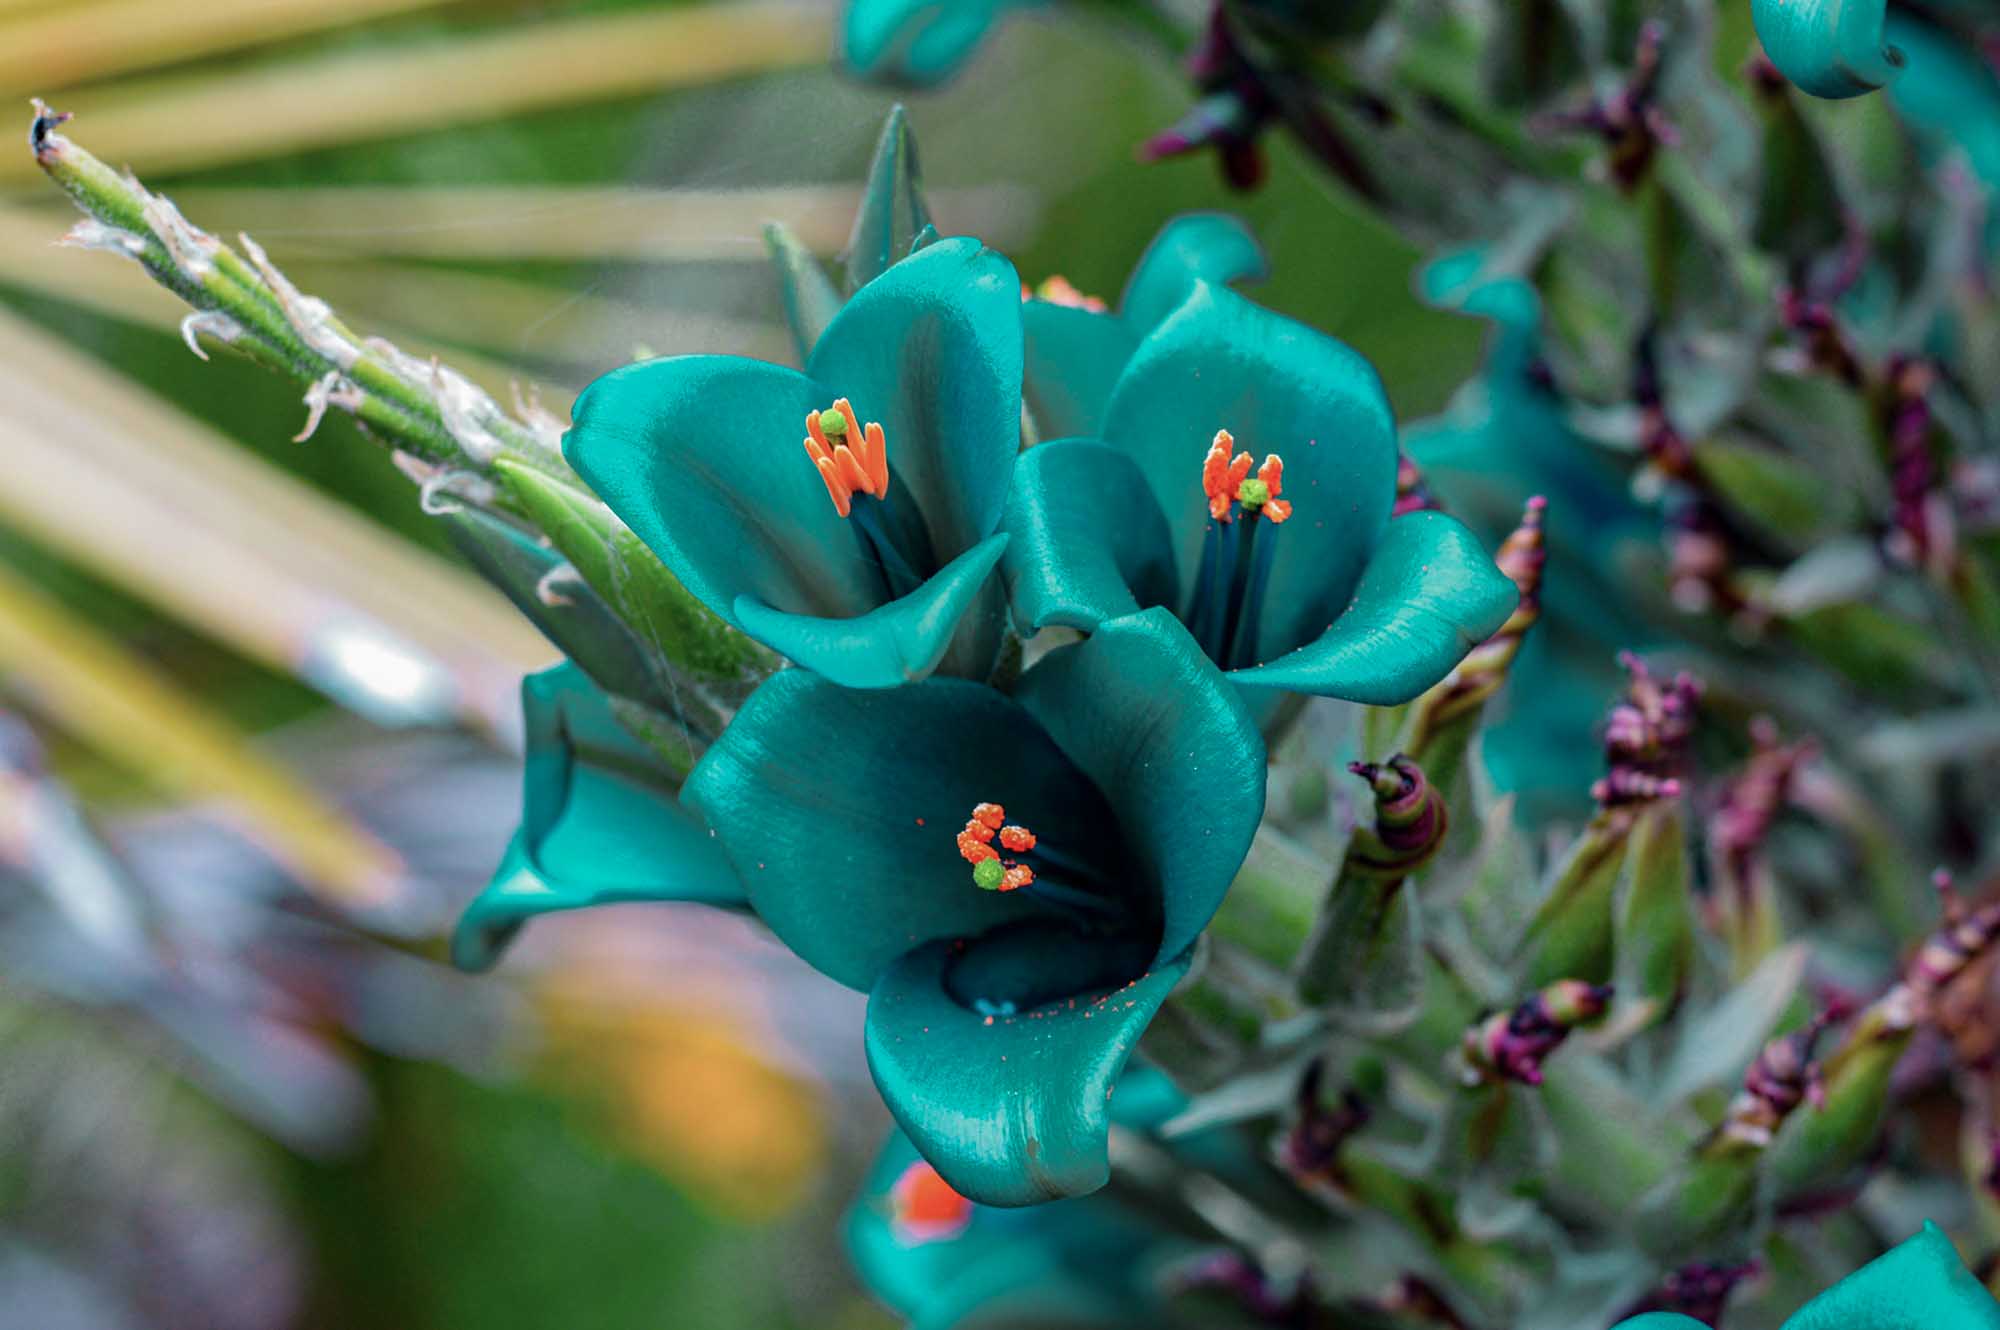 Puya is a teal flower with orange to yellow stalk